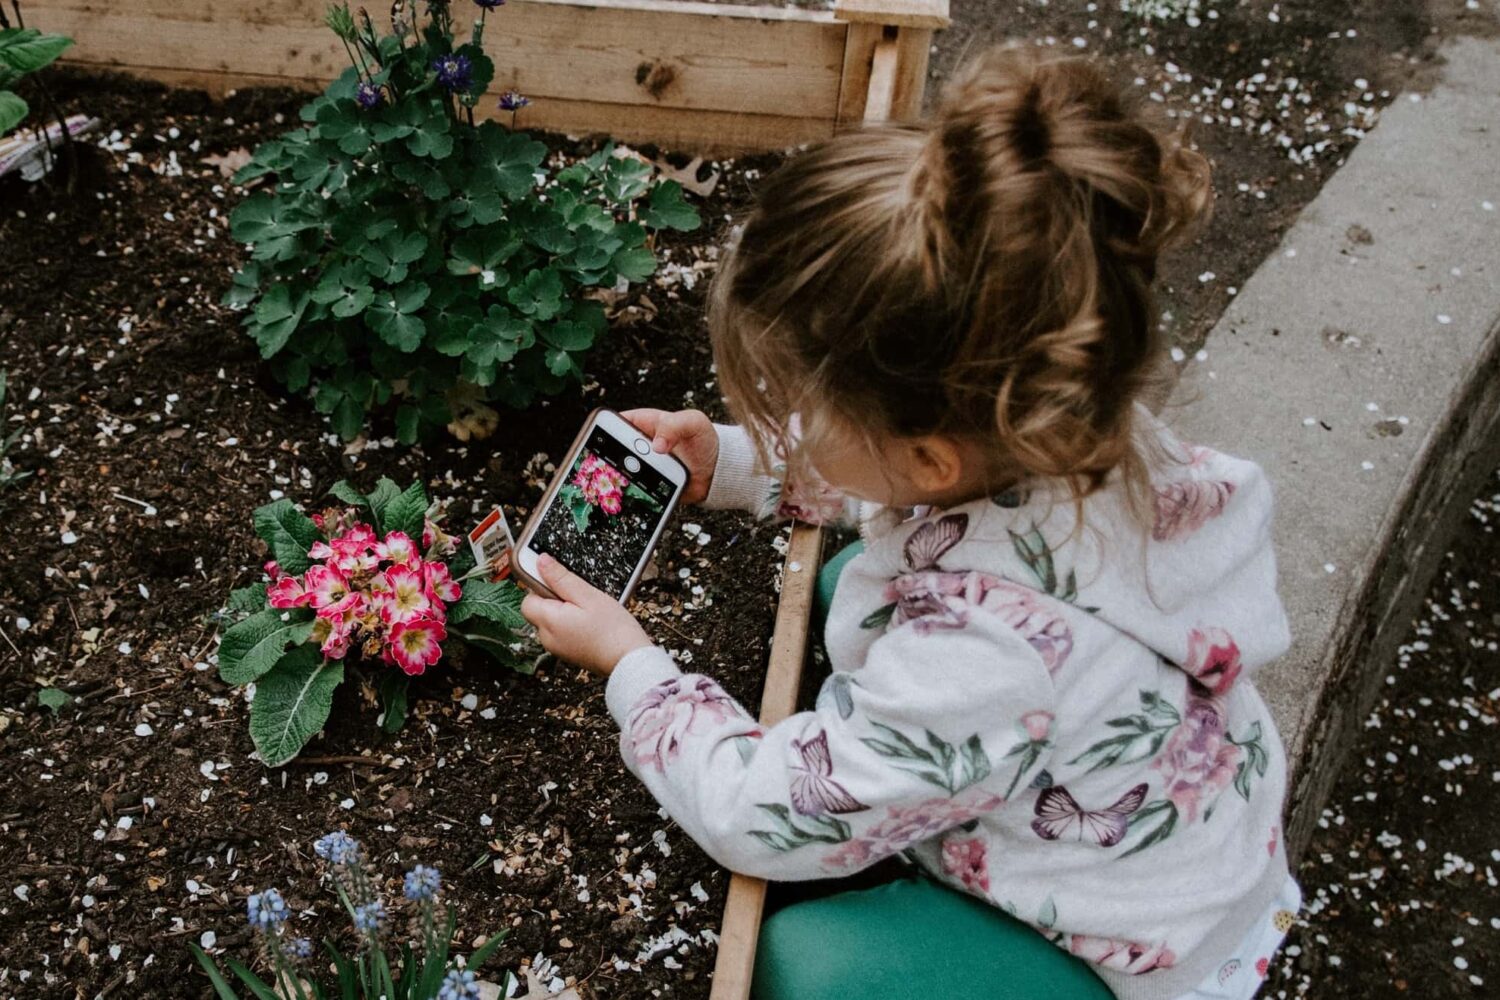 Child taking a picture of flower using iPhone